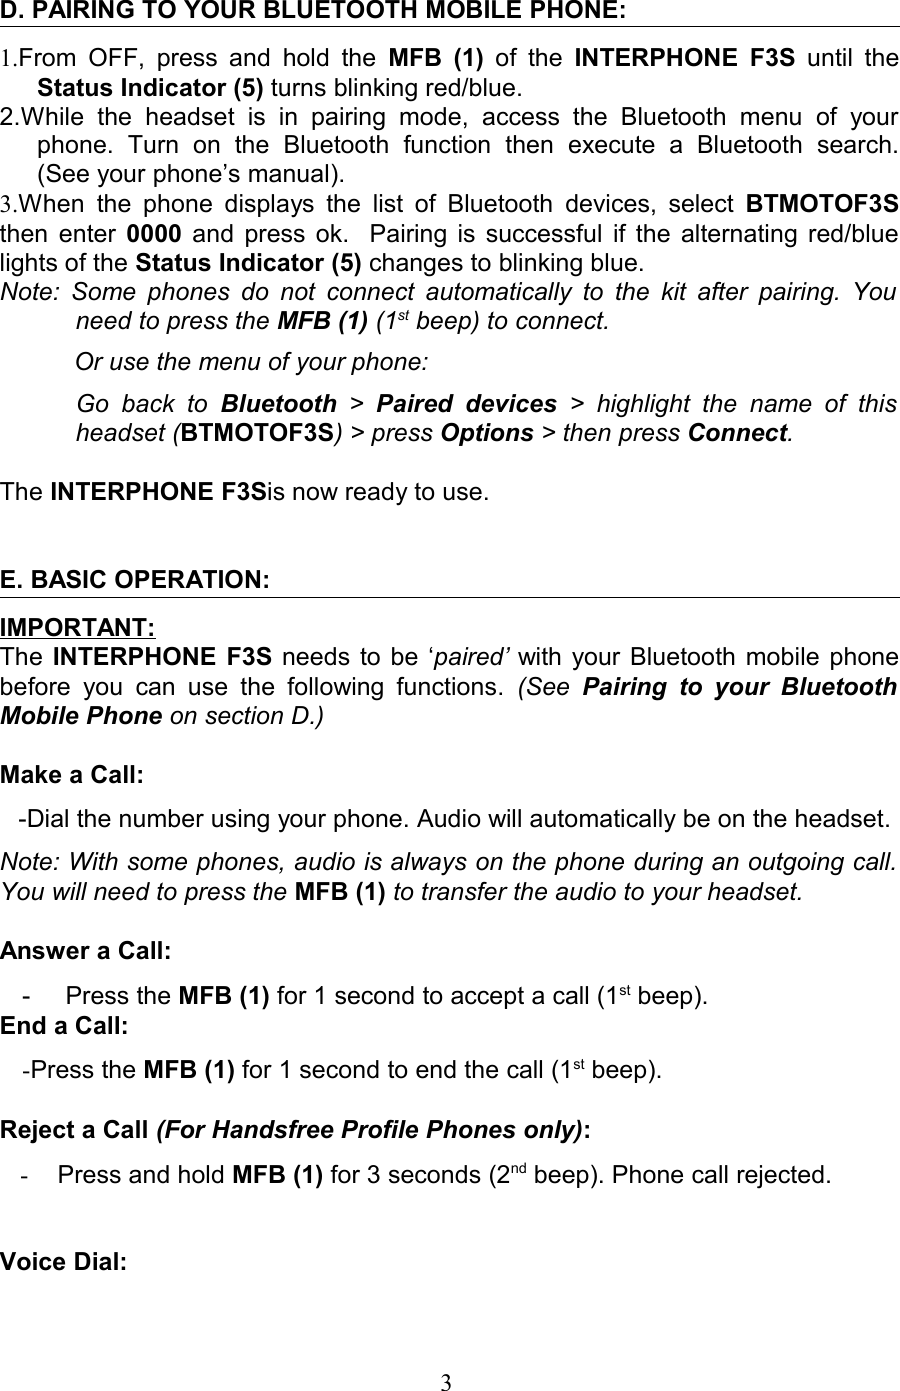 D. PAIRING TO YOUR BLUETOOTH MOBILE PHONE:1.From OFF, press and hold the  MFB (1)  of  the  INTERPHONE F3S  until the Status Indicator (5) turns blinking red/blue.2.While   the   headset   is   in   pairing   mode,   access   the   Bluetooth   menu   of   your phone.   Turn   on   the   Bluetooth   function   then   execute   a   Bluetooth   search. (See your phone’s manual). 3.When  the  phone displays the list of Bluetooth devices, select  BTMOTOF3S then enter  0000  and press ok.   Pairing is successful if the alternating red/blue lights of the Status Indicator (5) changes to blinking blue.  Note: Some phones do not connect automatically to the kit after pairing. You  need to press the MFB (1) (1st beep) to connect. Or use the menu of your phone:Go back  to  Bluetooth  &gt;  Paired  devices  &gt;  highlight  the   name  of  this  headset (BTMOTOF3S) &gt; press Options &gt; then press Connect.The INTERPHONE F3Sis now ready to use.E. BASIC OPERATION:IMPORTANT:The  INTERPHONE F3S  needs to be ‘paired’ with your Bluetooth mobile phone before   you can   use the following functions.  (See  Pairing  to  your Bluetooth Mobile Phone on section D.)Make a Call: -Dial the number using your phone. Audio will automatically be on the headset.Note: With some phones, audio is always on the phone during an outgoing call.  You will need to press the MFB (1) to transfer the audio to your headset.Answer a Call: -     Press the MFB (1) for 1 second to accept a call (1st beep).End a Call: -Press the MFB (1) for 1 second to end the call (1st beep).Reject a Call (For Handsfree Profile Phones only): -Press and hold MFB (1) for 3 seconds (2nd beep). Phone call rejected.Voice Dial:                                                                     3 